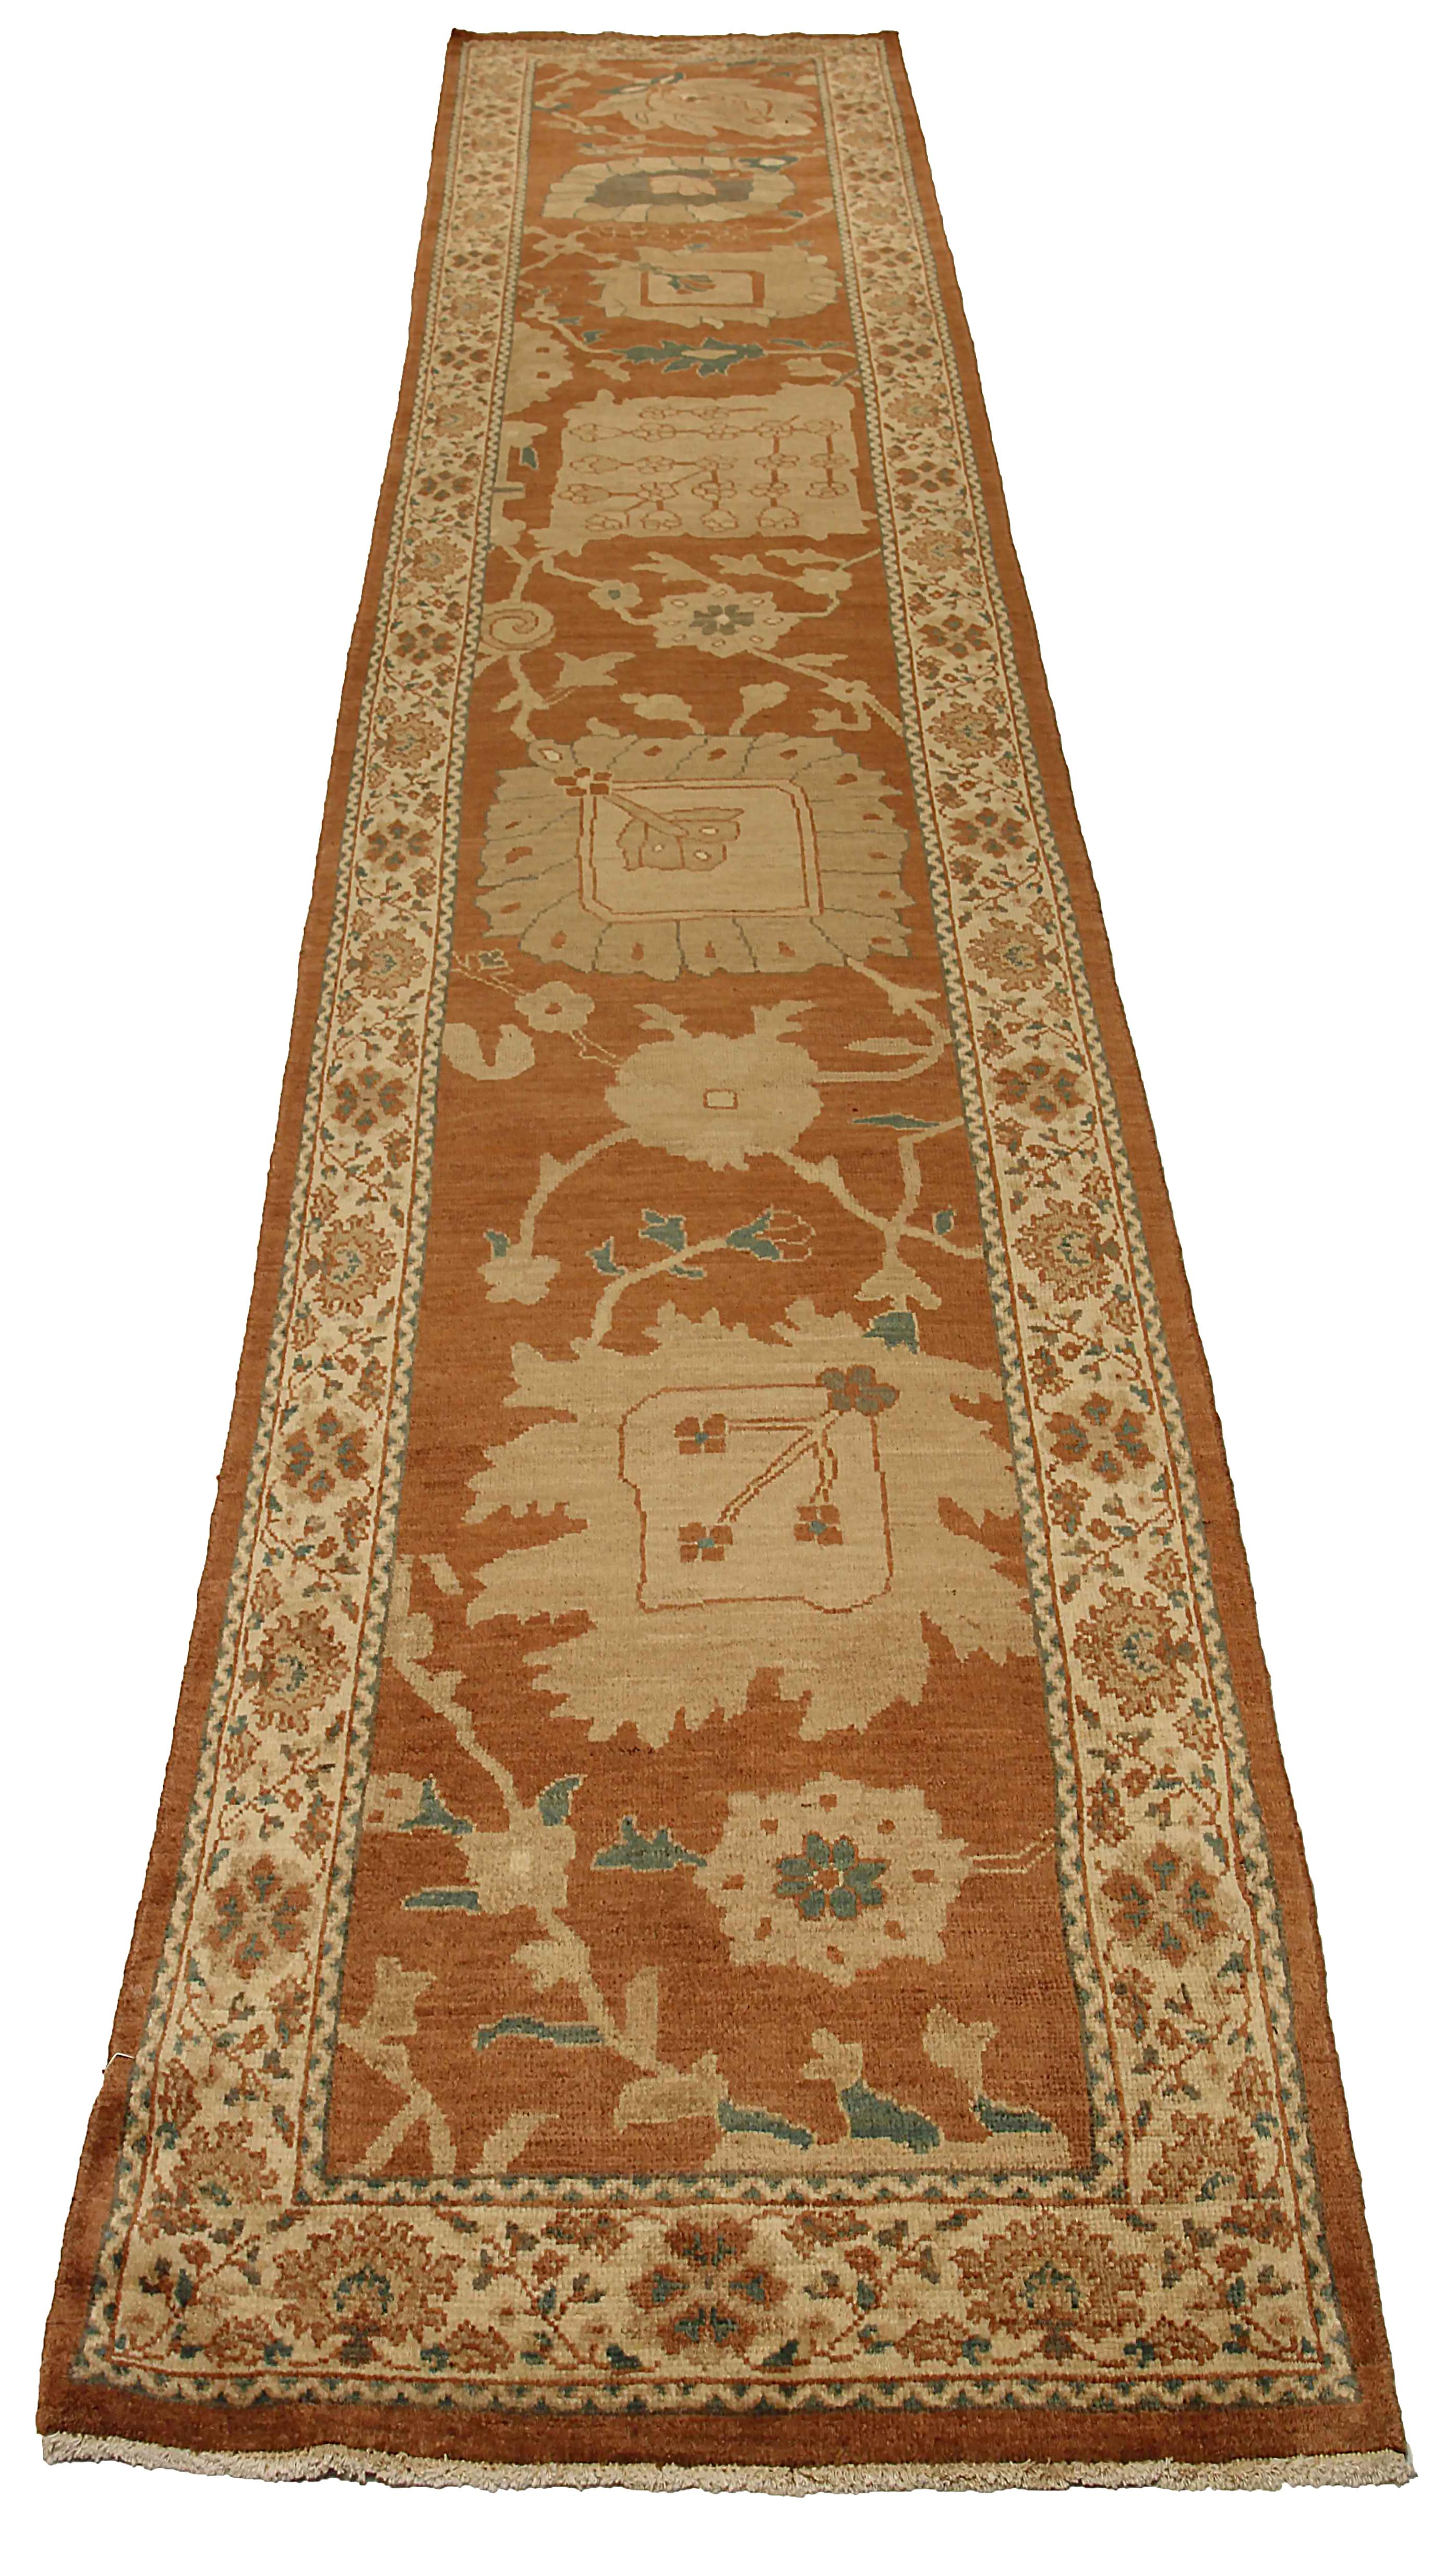 Antique handmade Turkish runner rug from high quality sheep’s wool and colored with eco-friendly vegetable dyes that are proven safe for humans and pets alike. It’s a classic Sultanabad design showcasing a regal brown field with prominent Herati